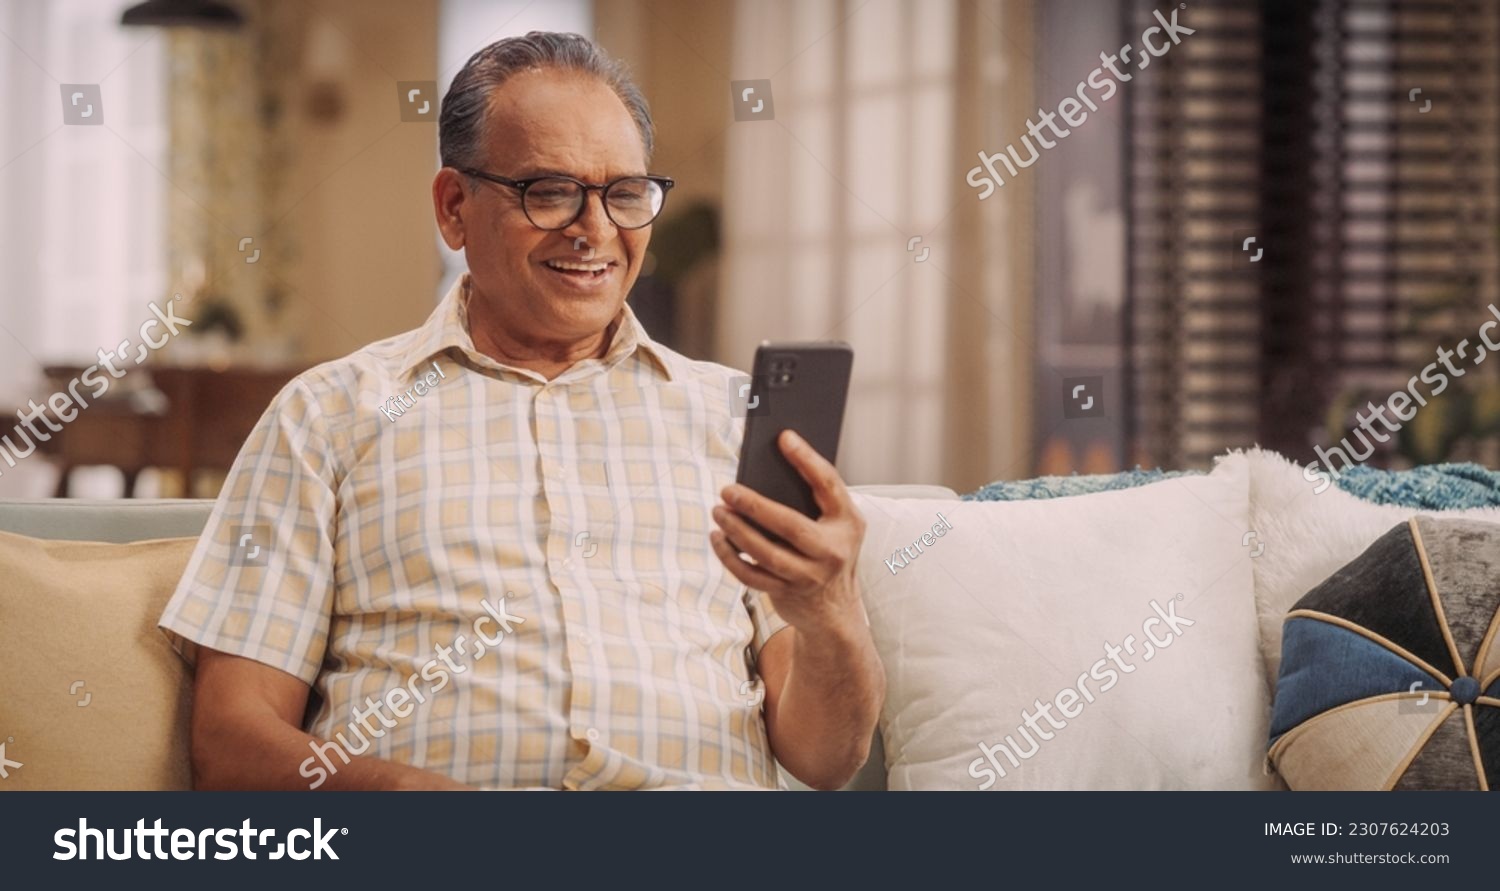 Elderly Indian Man Using Phone for Video Call, Smiling and Happy: Talking with Old Friends and Sharing Life Updates. Cherishing Meaningful Conversations and Laughter with Family Remotely #2307624203